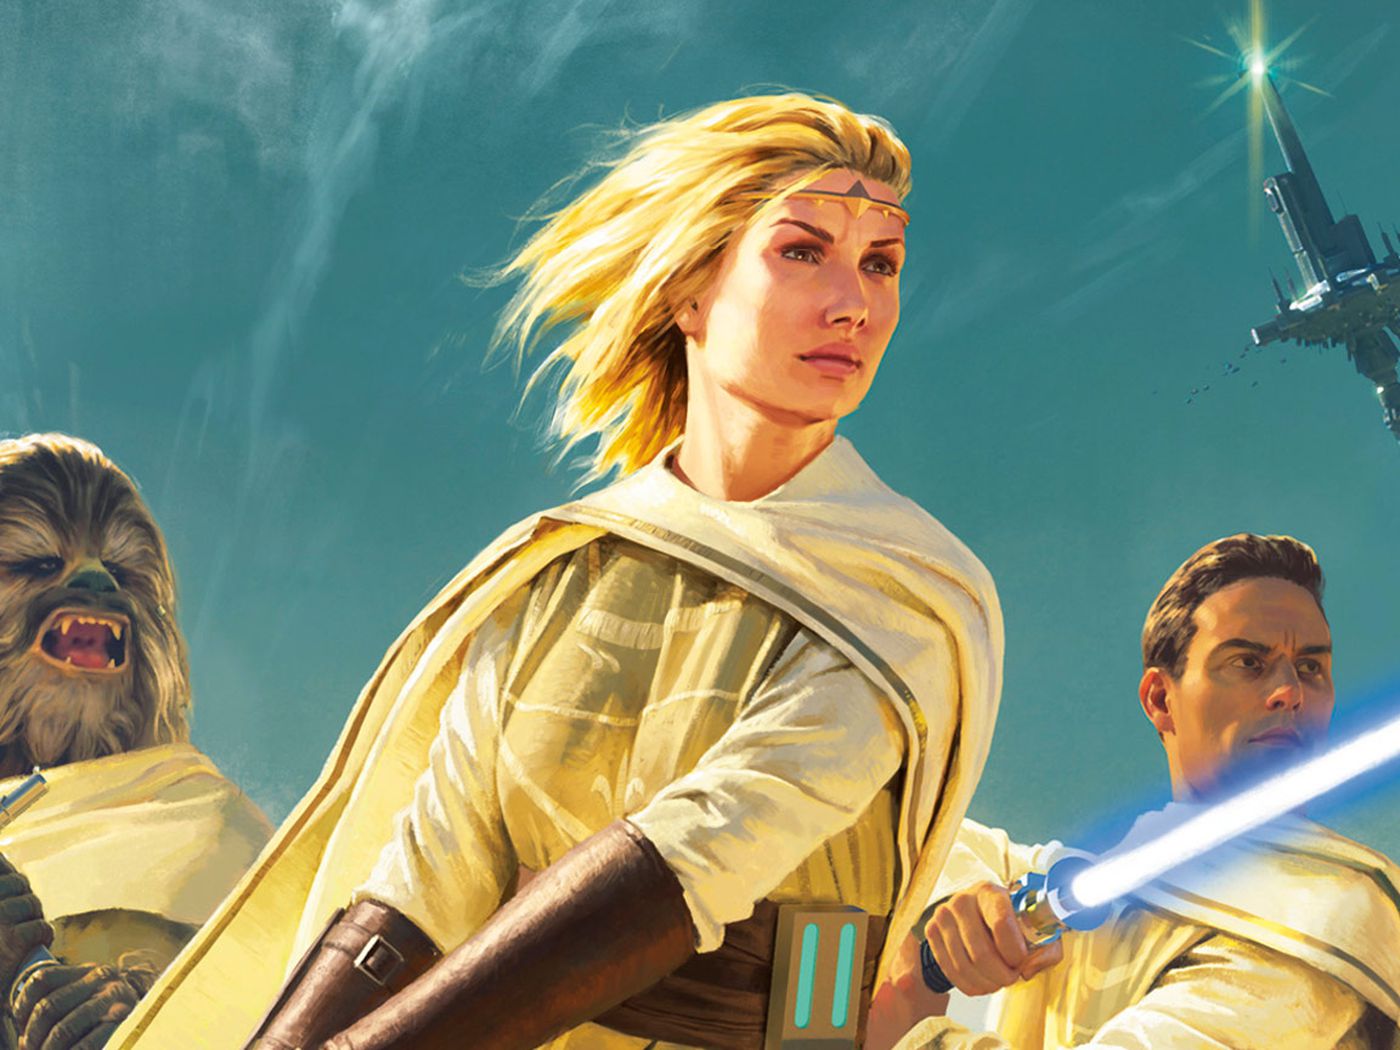 One cartoon character holding a blue lightsaber sword, a lady character ready for a fight and behind her is Chewbacca